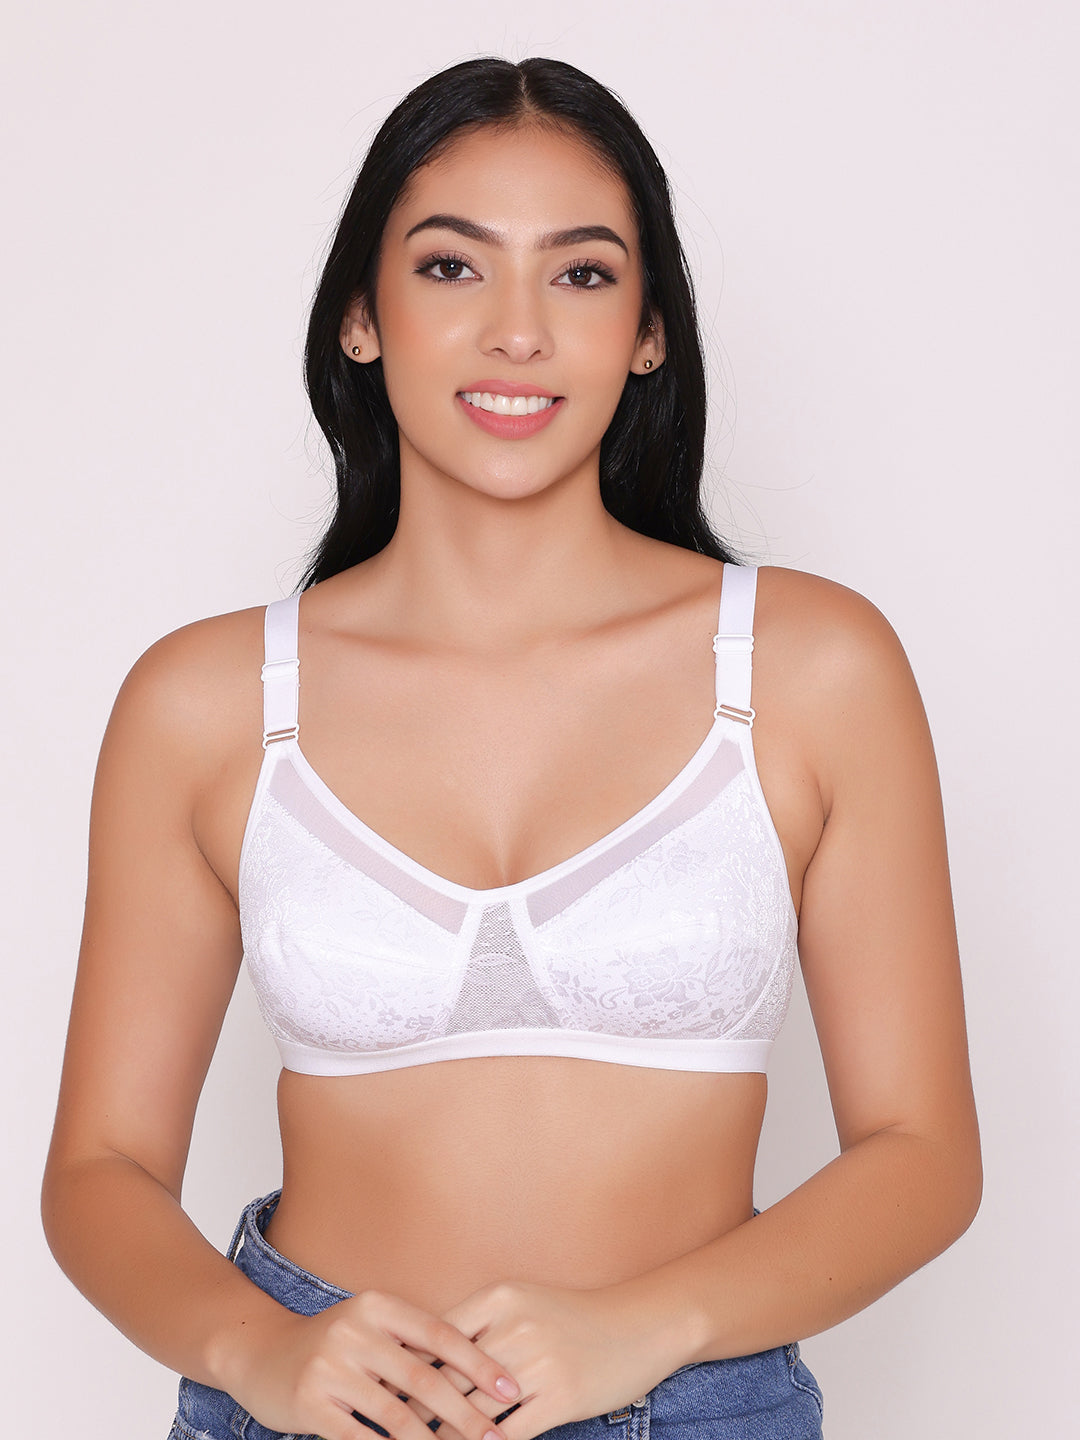 Best Full Coverage bras for daily use for women in India